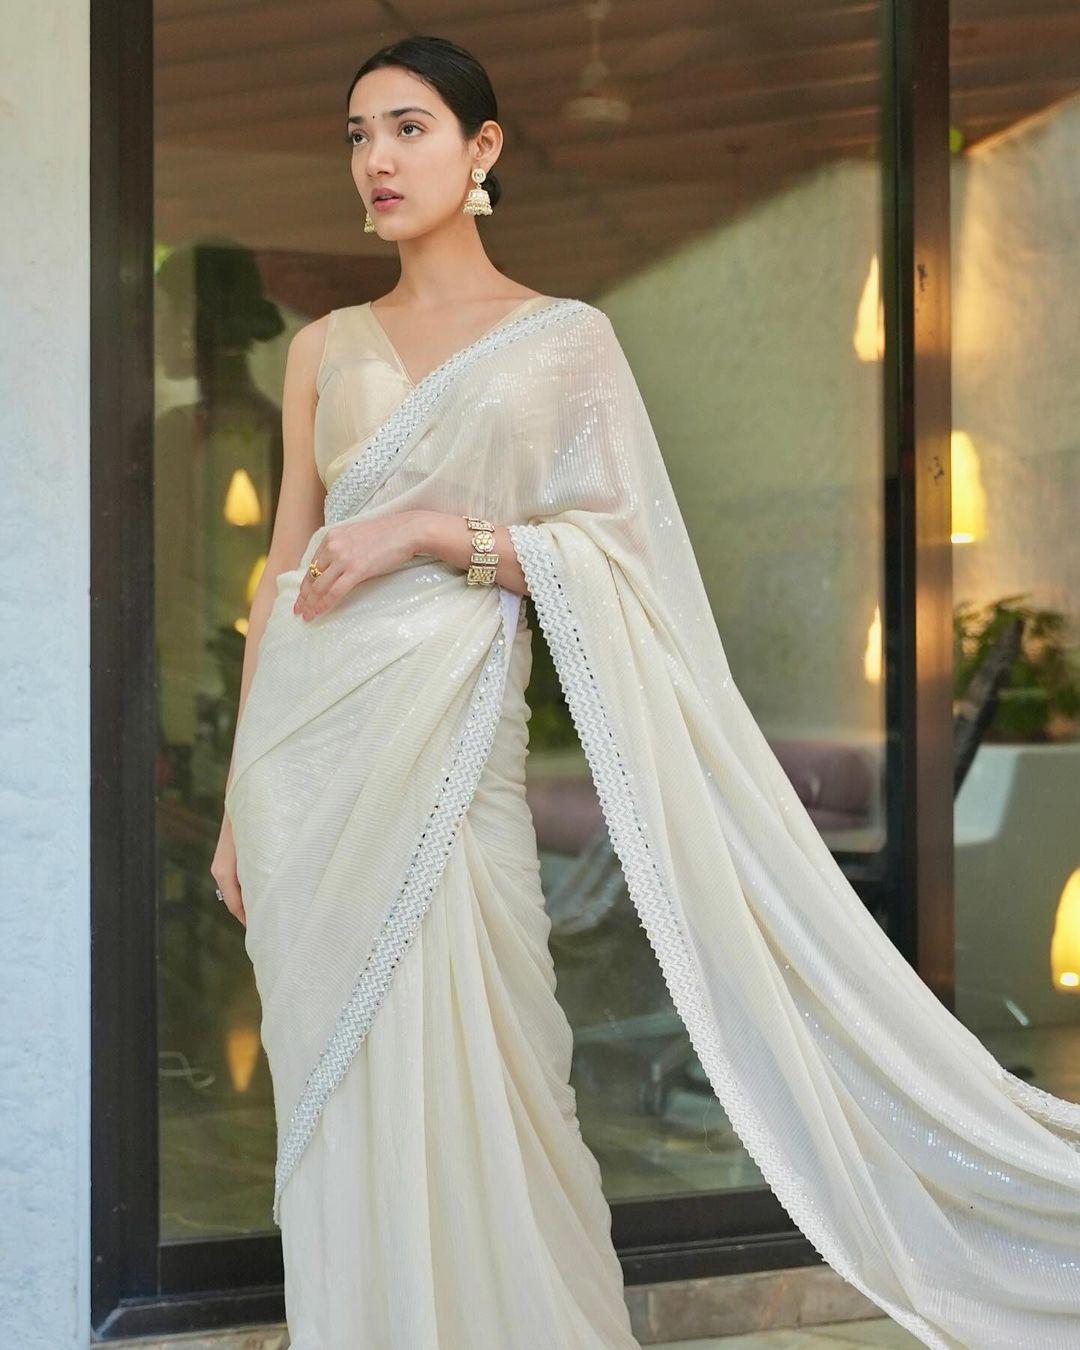 For the wedding season, Medha shines in a stunning white saree, complemented by signature no-makeup elegance, a black bindi, and exquisite Jhumkas